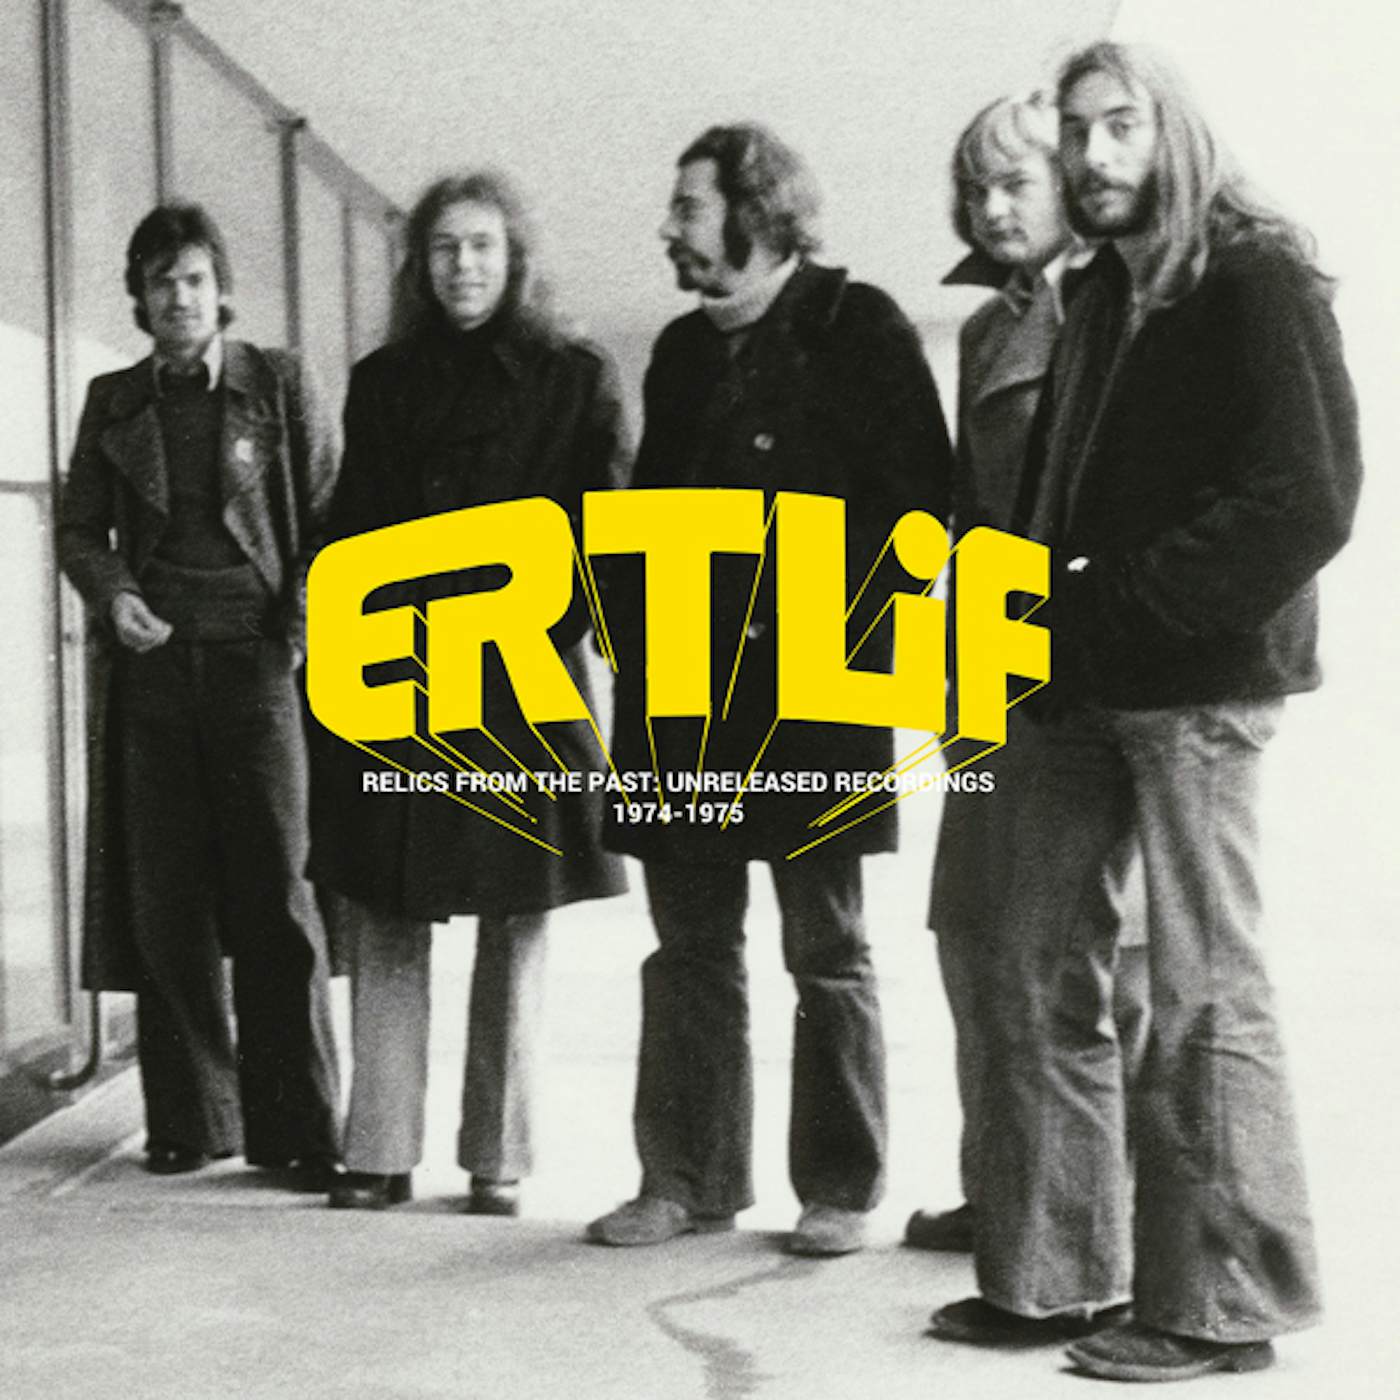 Ertlif Relics from the Past Vinyl Record